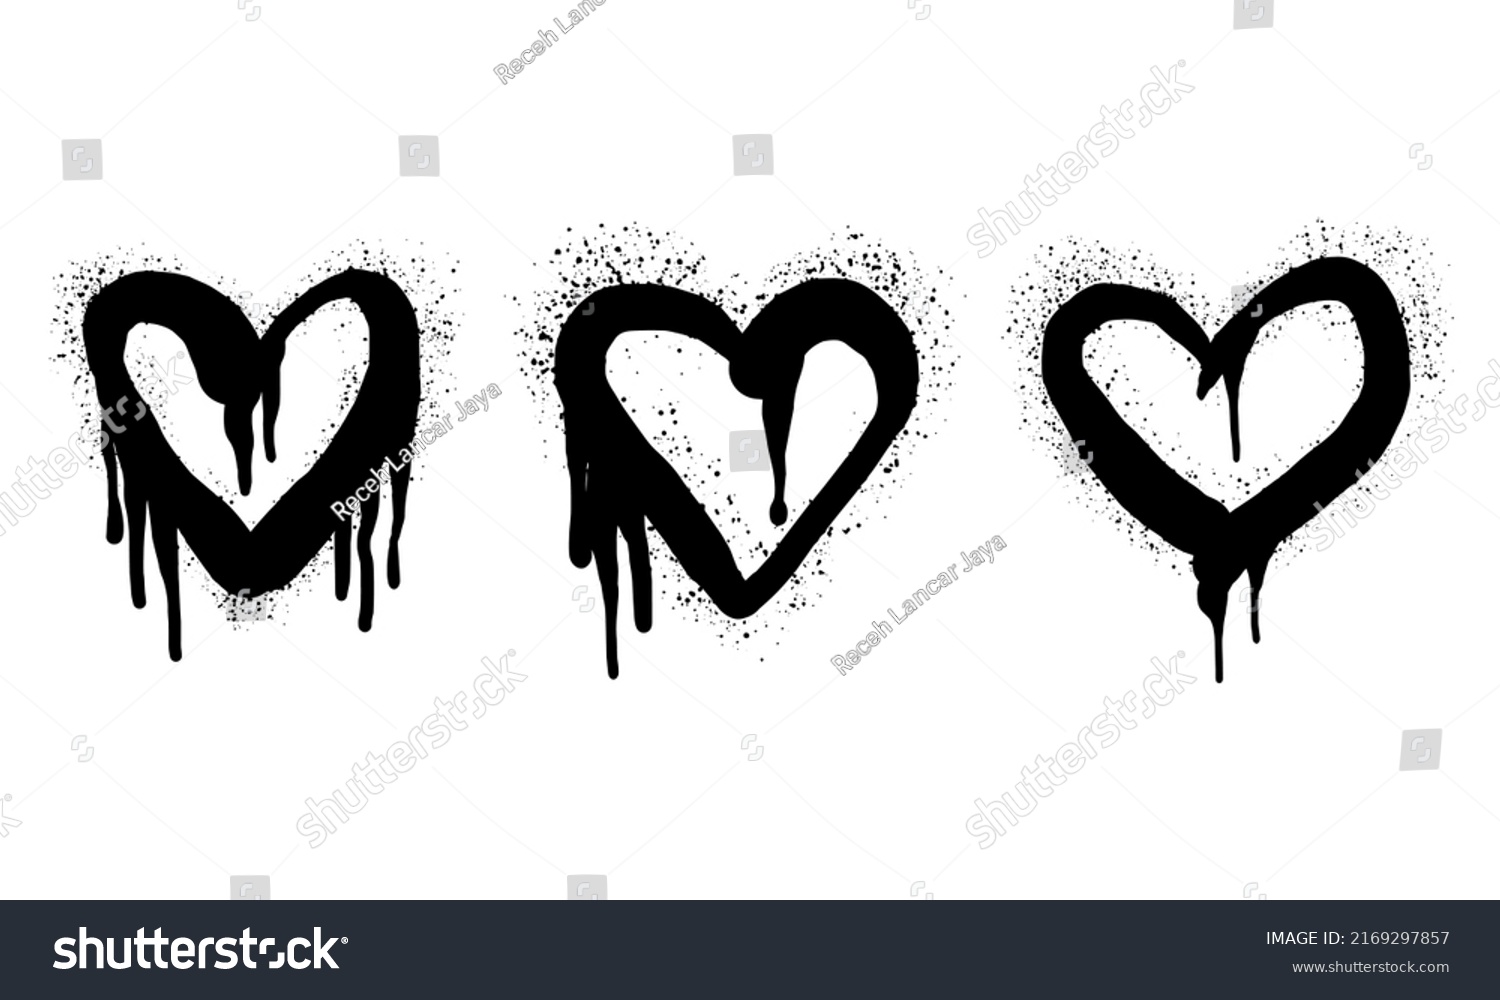 SVG of collection of Spray painted graffiti heart sign in black over white. Love heart drip symbol.  isolated on white background. vector illustration svg